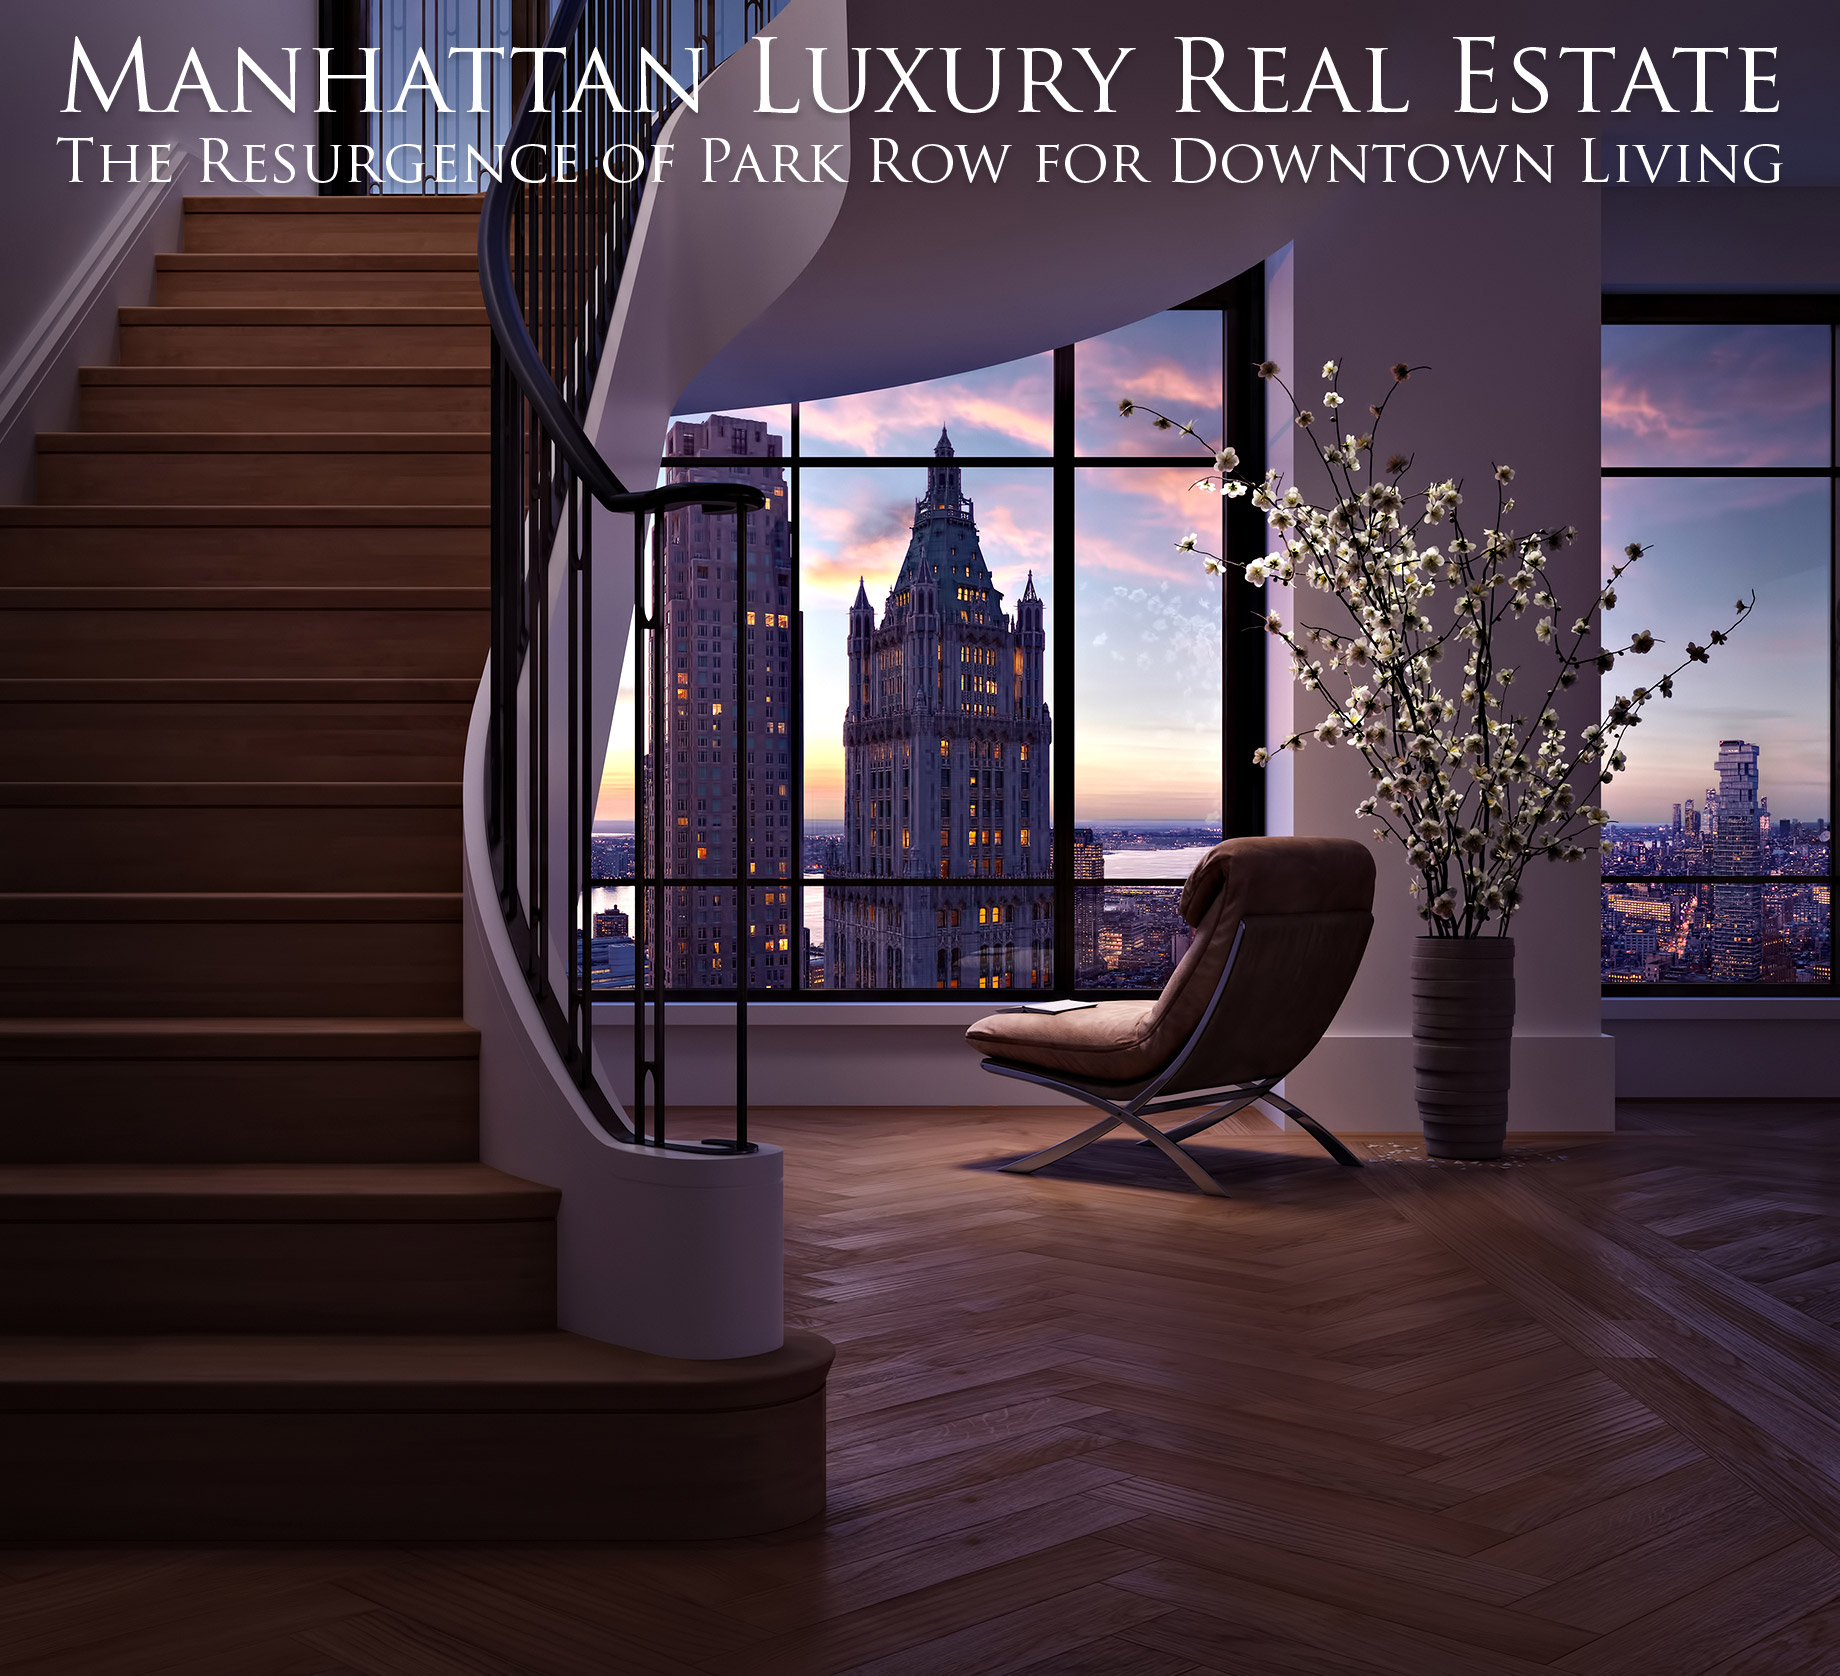 Manhattan Luxury Real Estate - The Resurgence of Park Row for Downtown Living